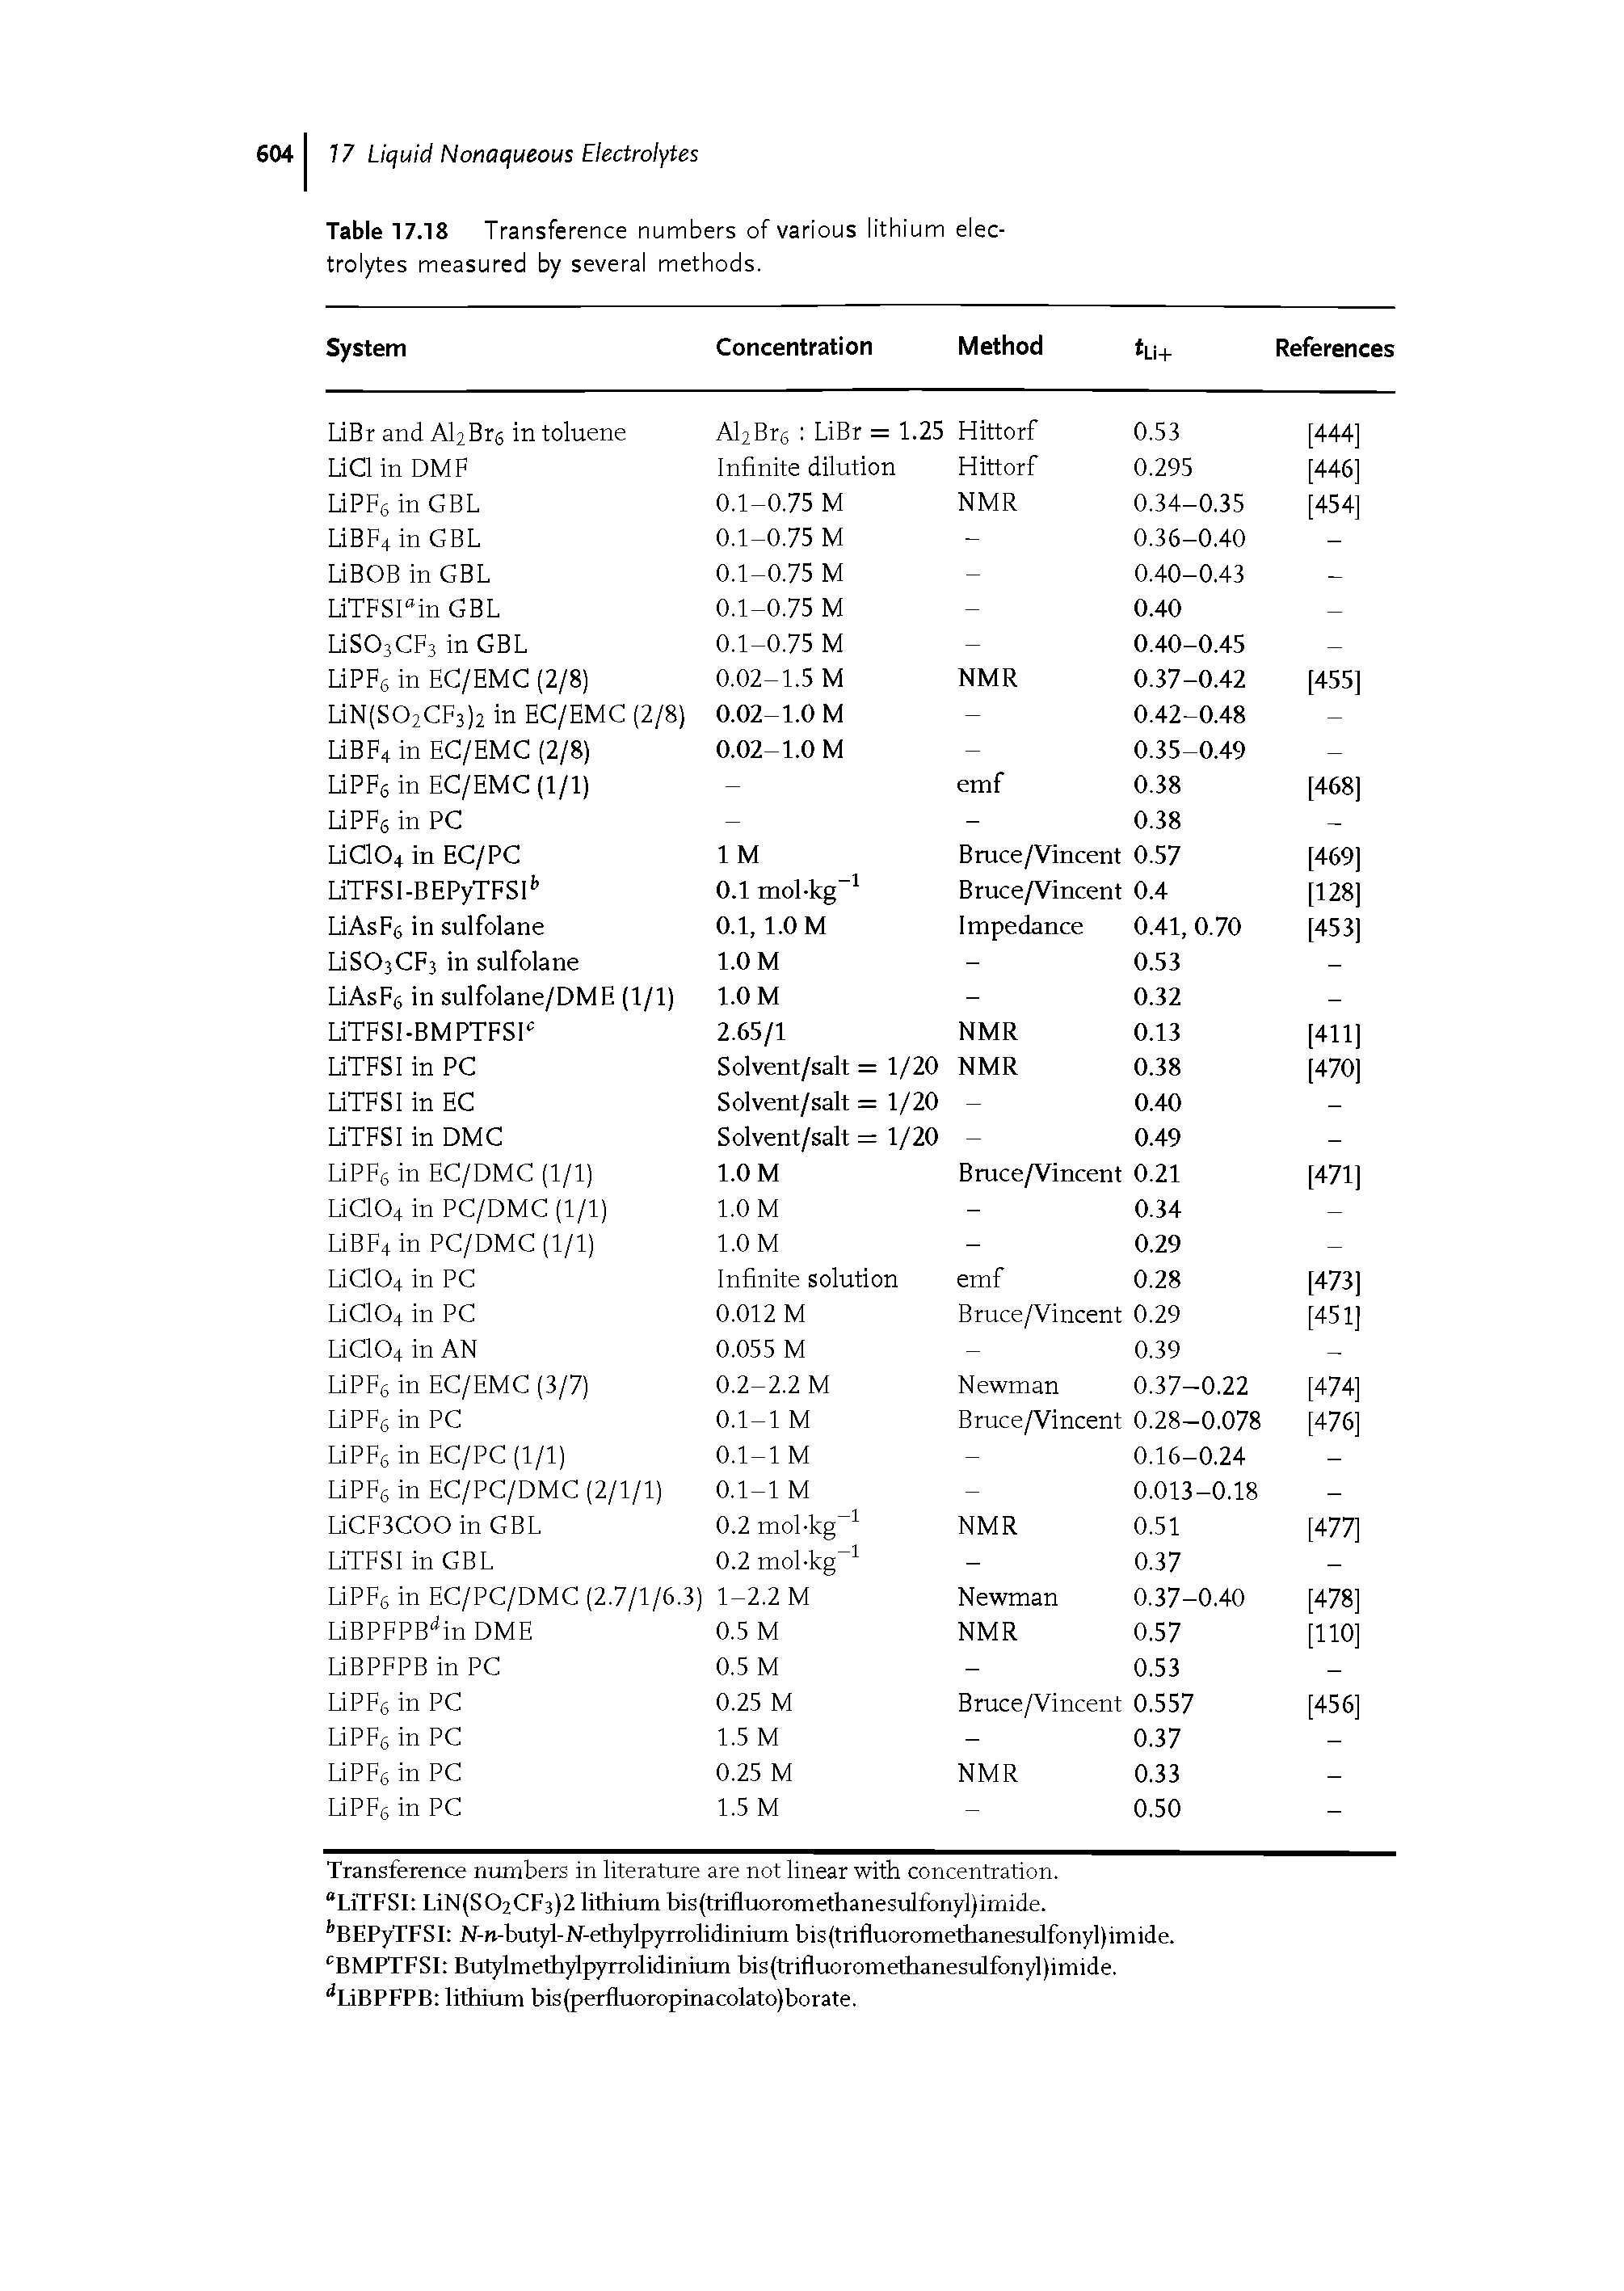 Table 17.18 Transference numbers of various lithium electrolytes measured by several methods.